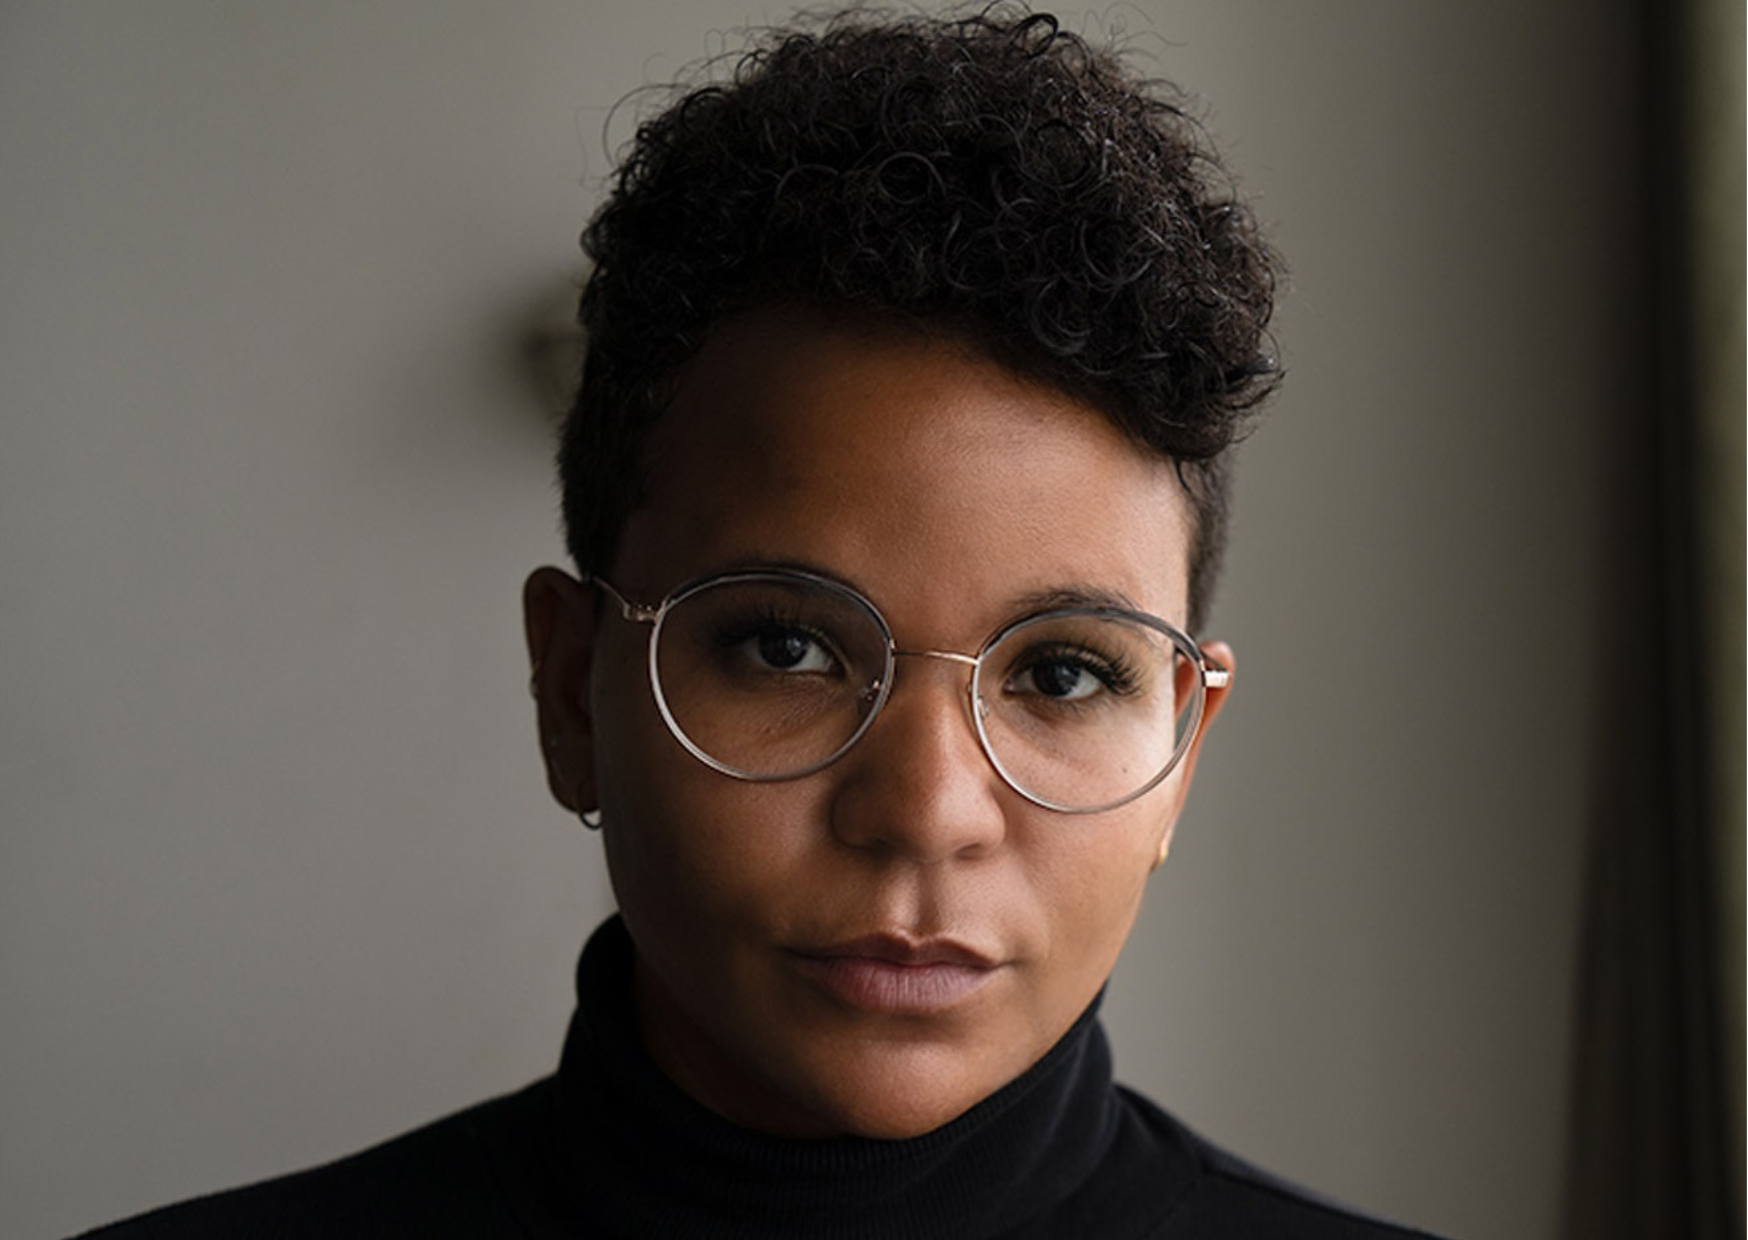 Portrait of a young woman with short hair wearing glasses